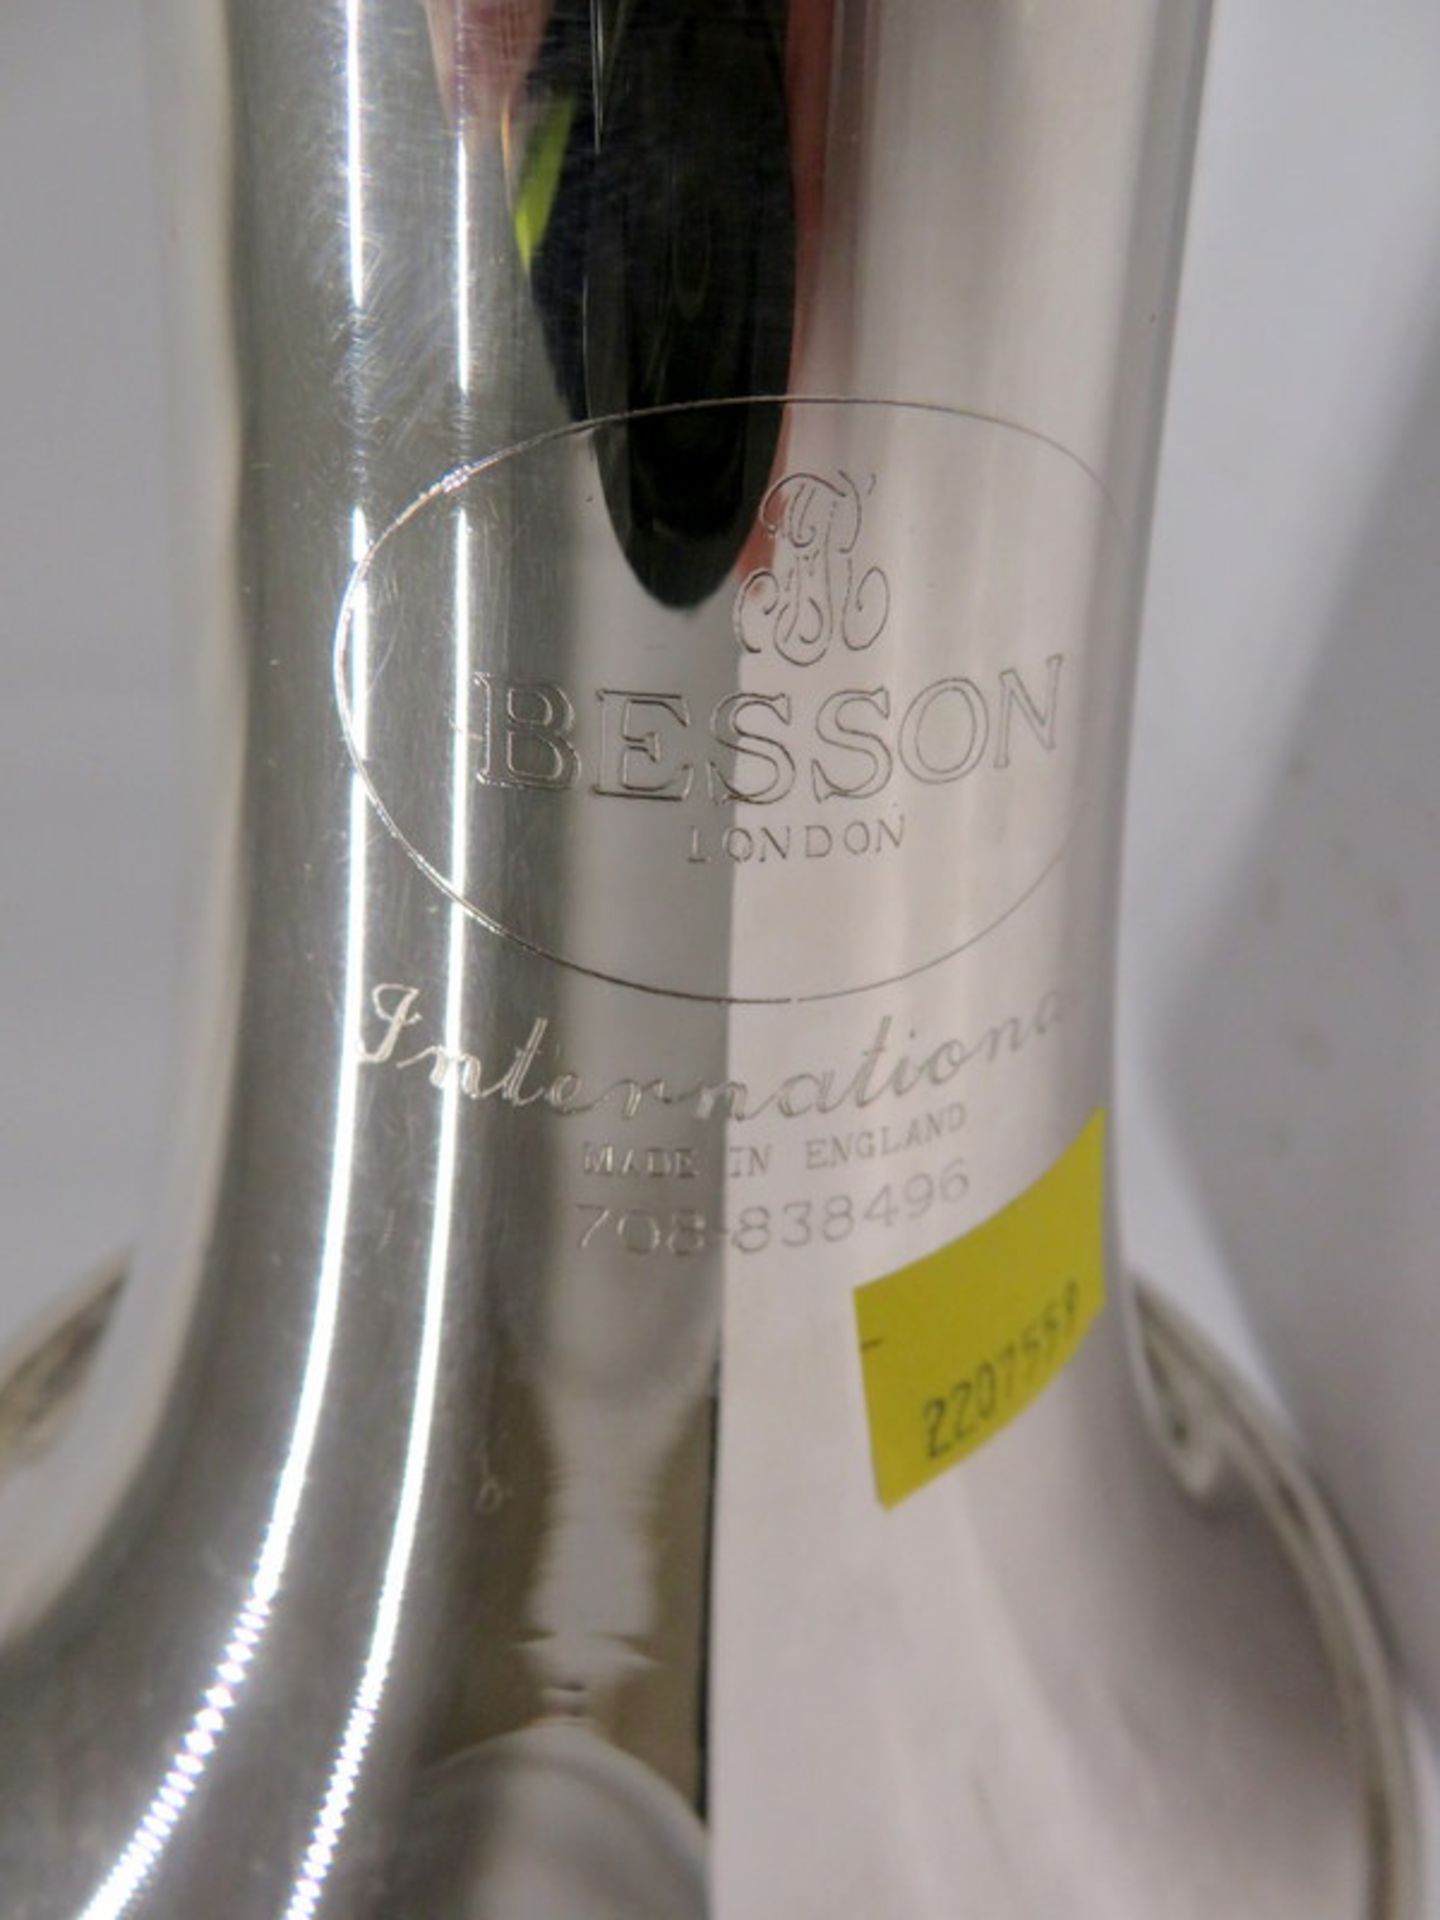 Besson 708 Fanfare Trumpet With Case. Serial Number: 838496. Please Note This Item Has Not - Image 15 of 17